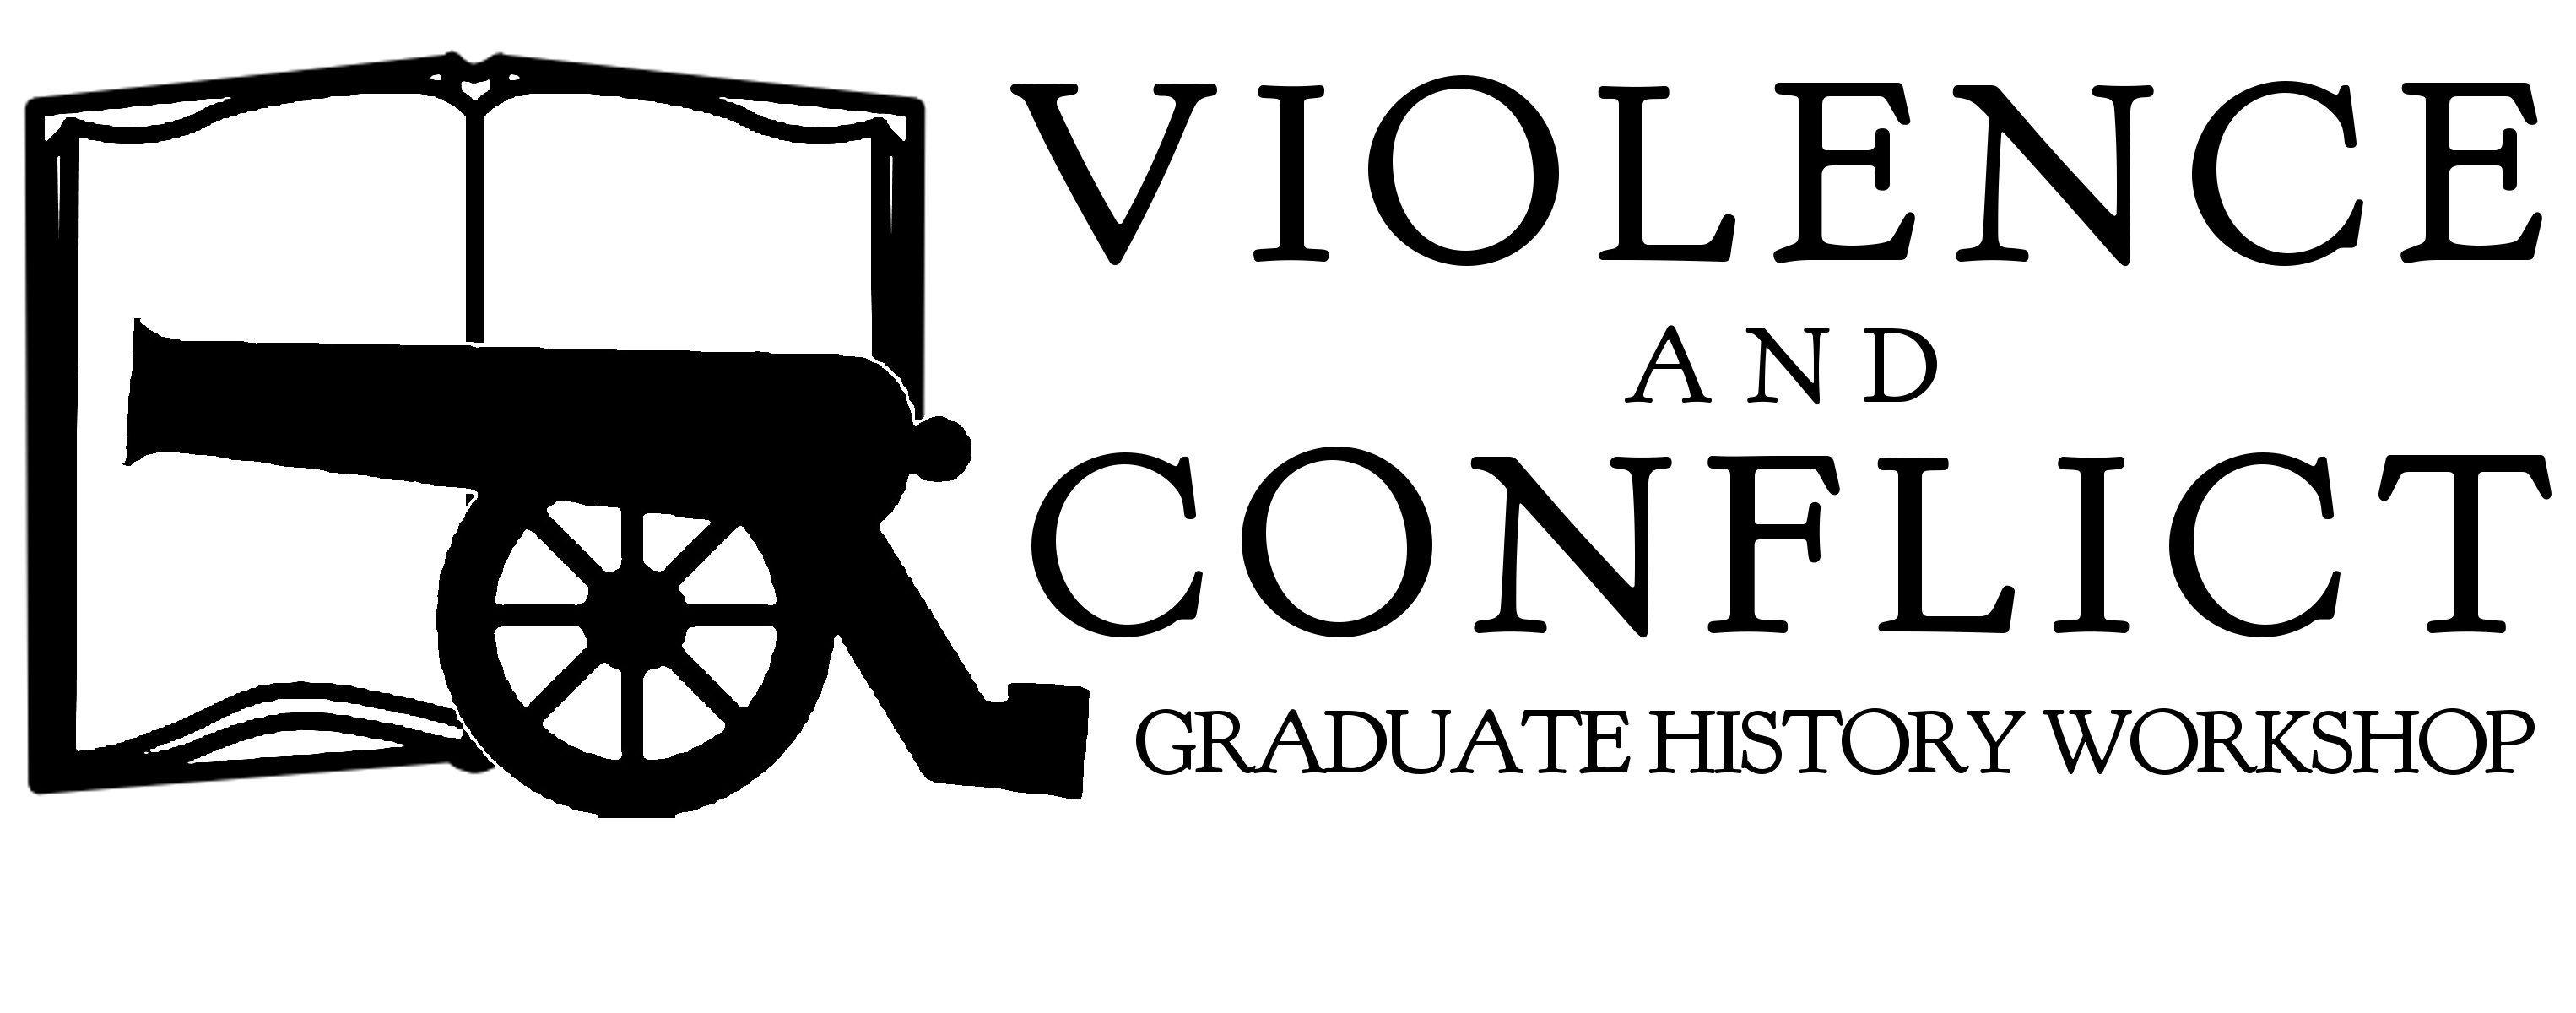 Conflict Logo - Violence and Conflict logo